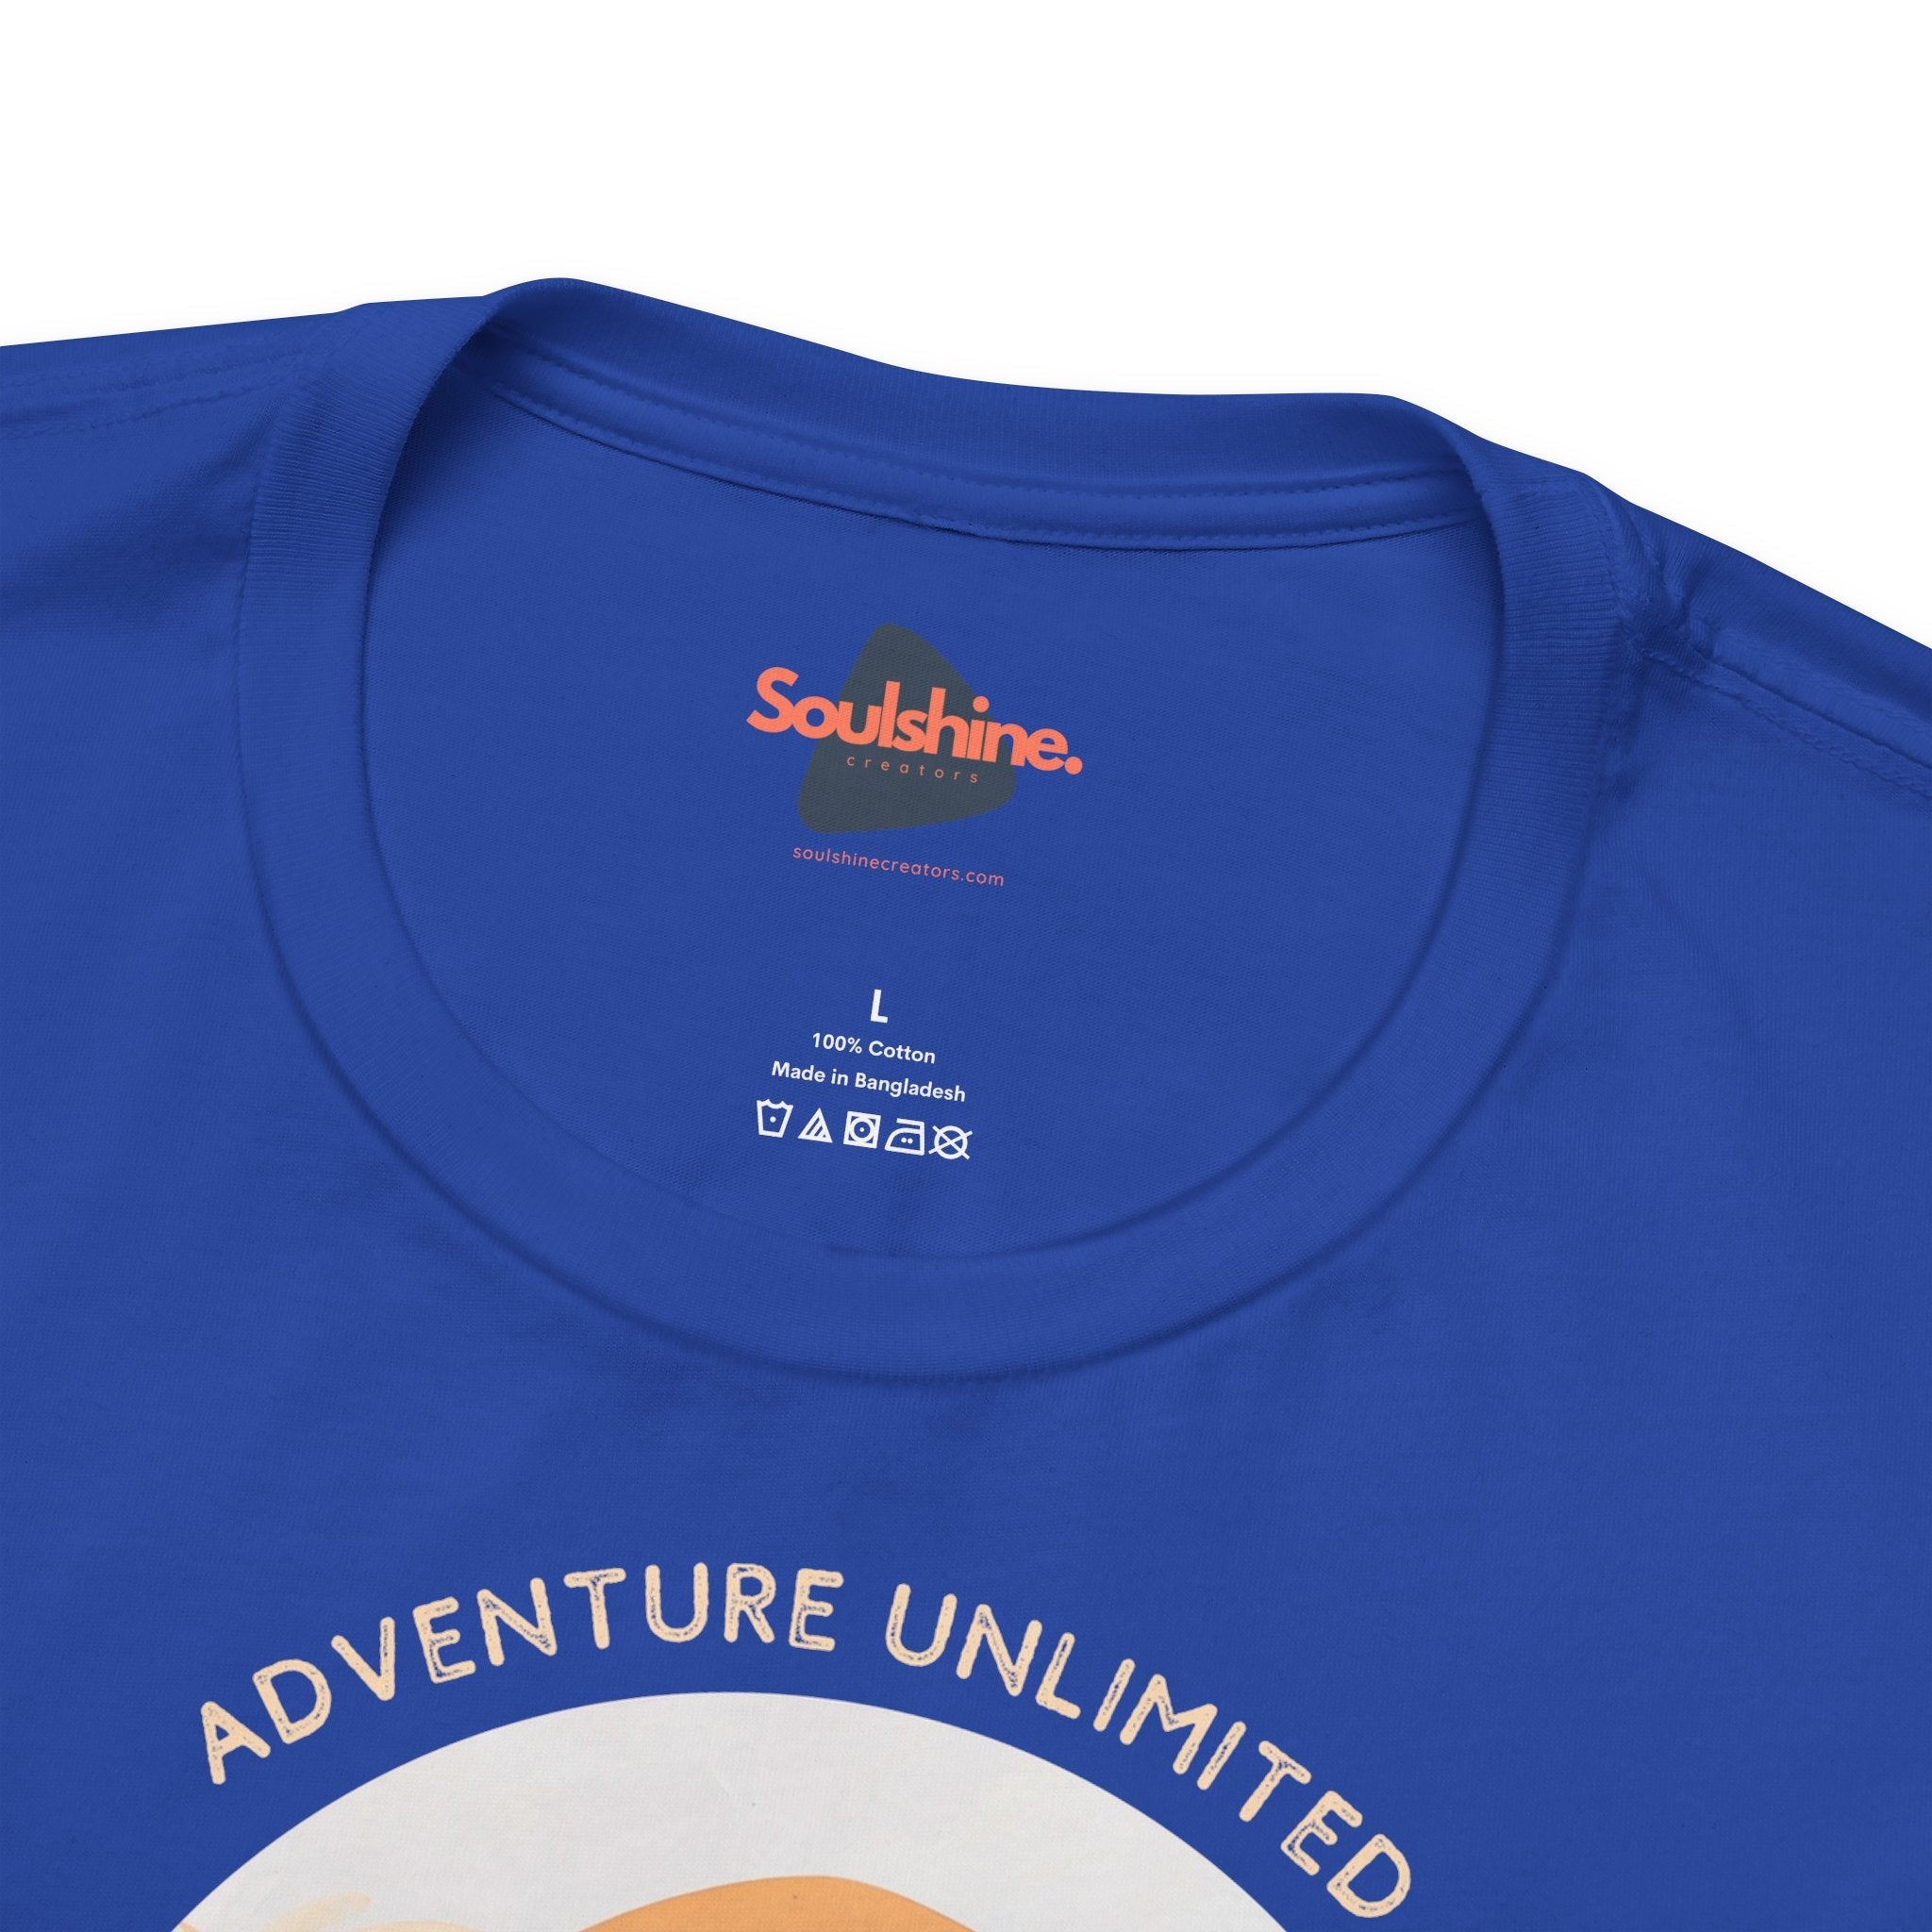 Adventure Unlimited t shirt - direct-to-garment printed item